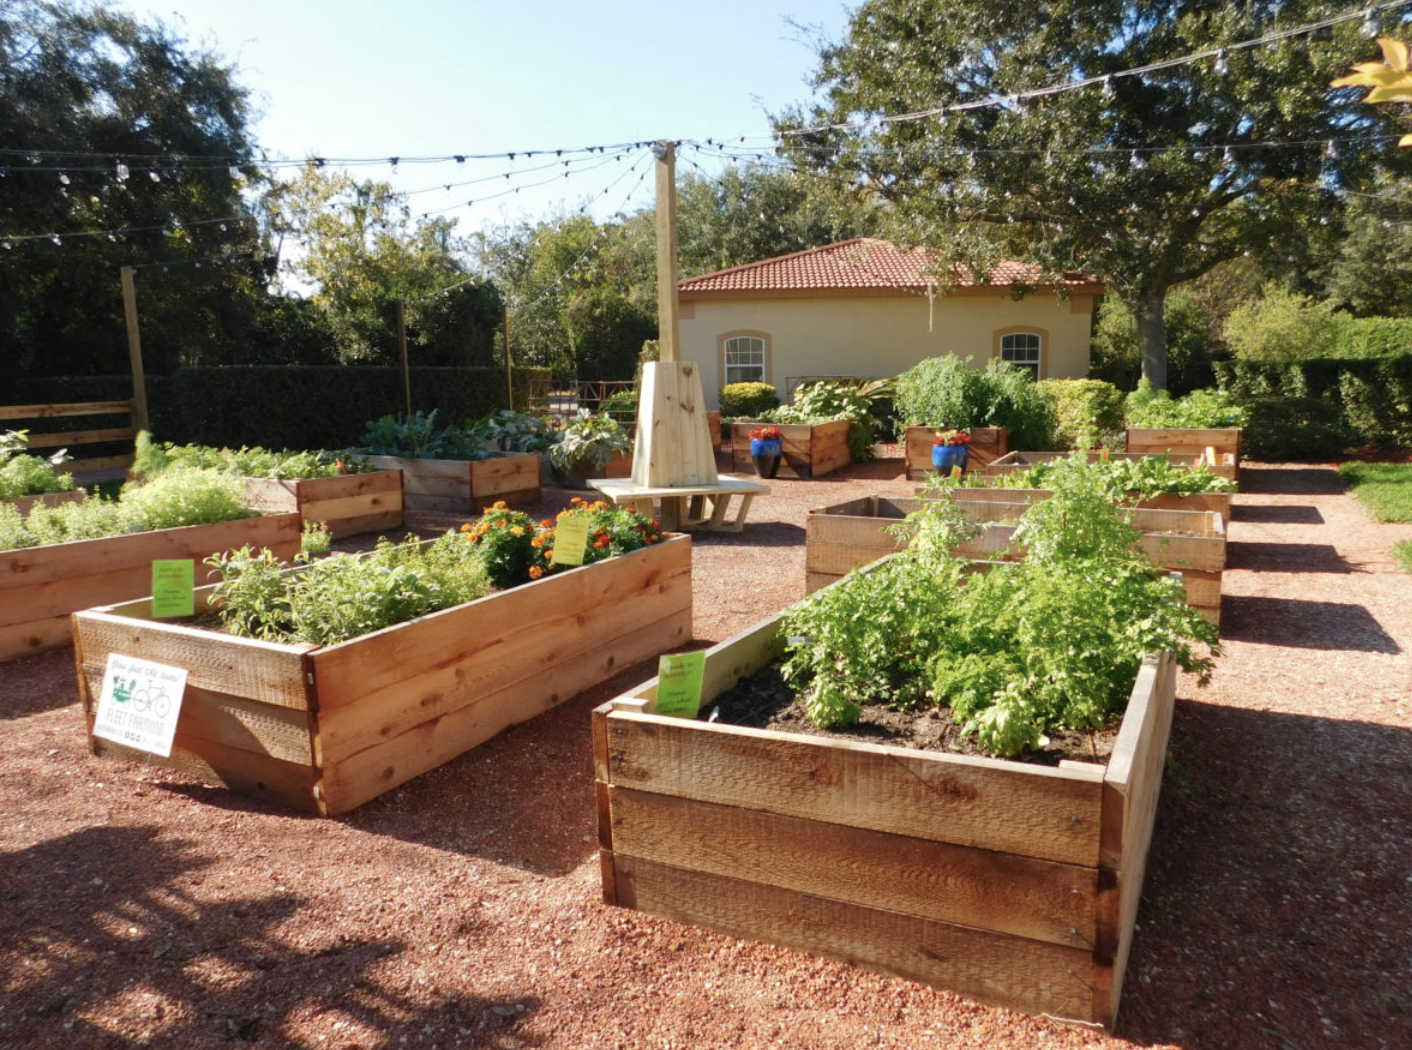 Image of one of Fleet Farming’s converted edible landscape, image sourced from Fleet Farming